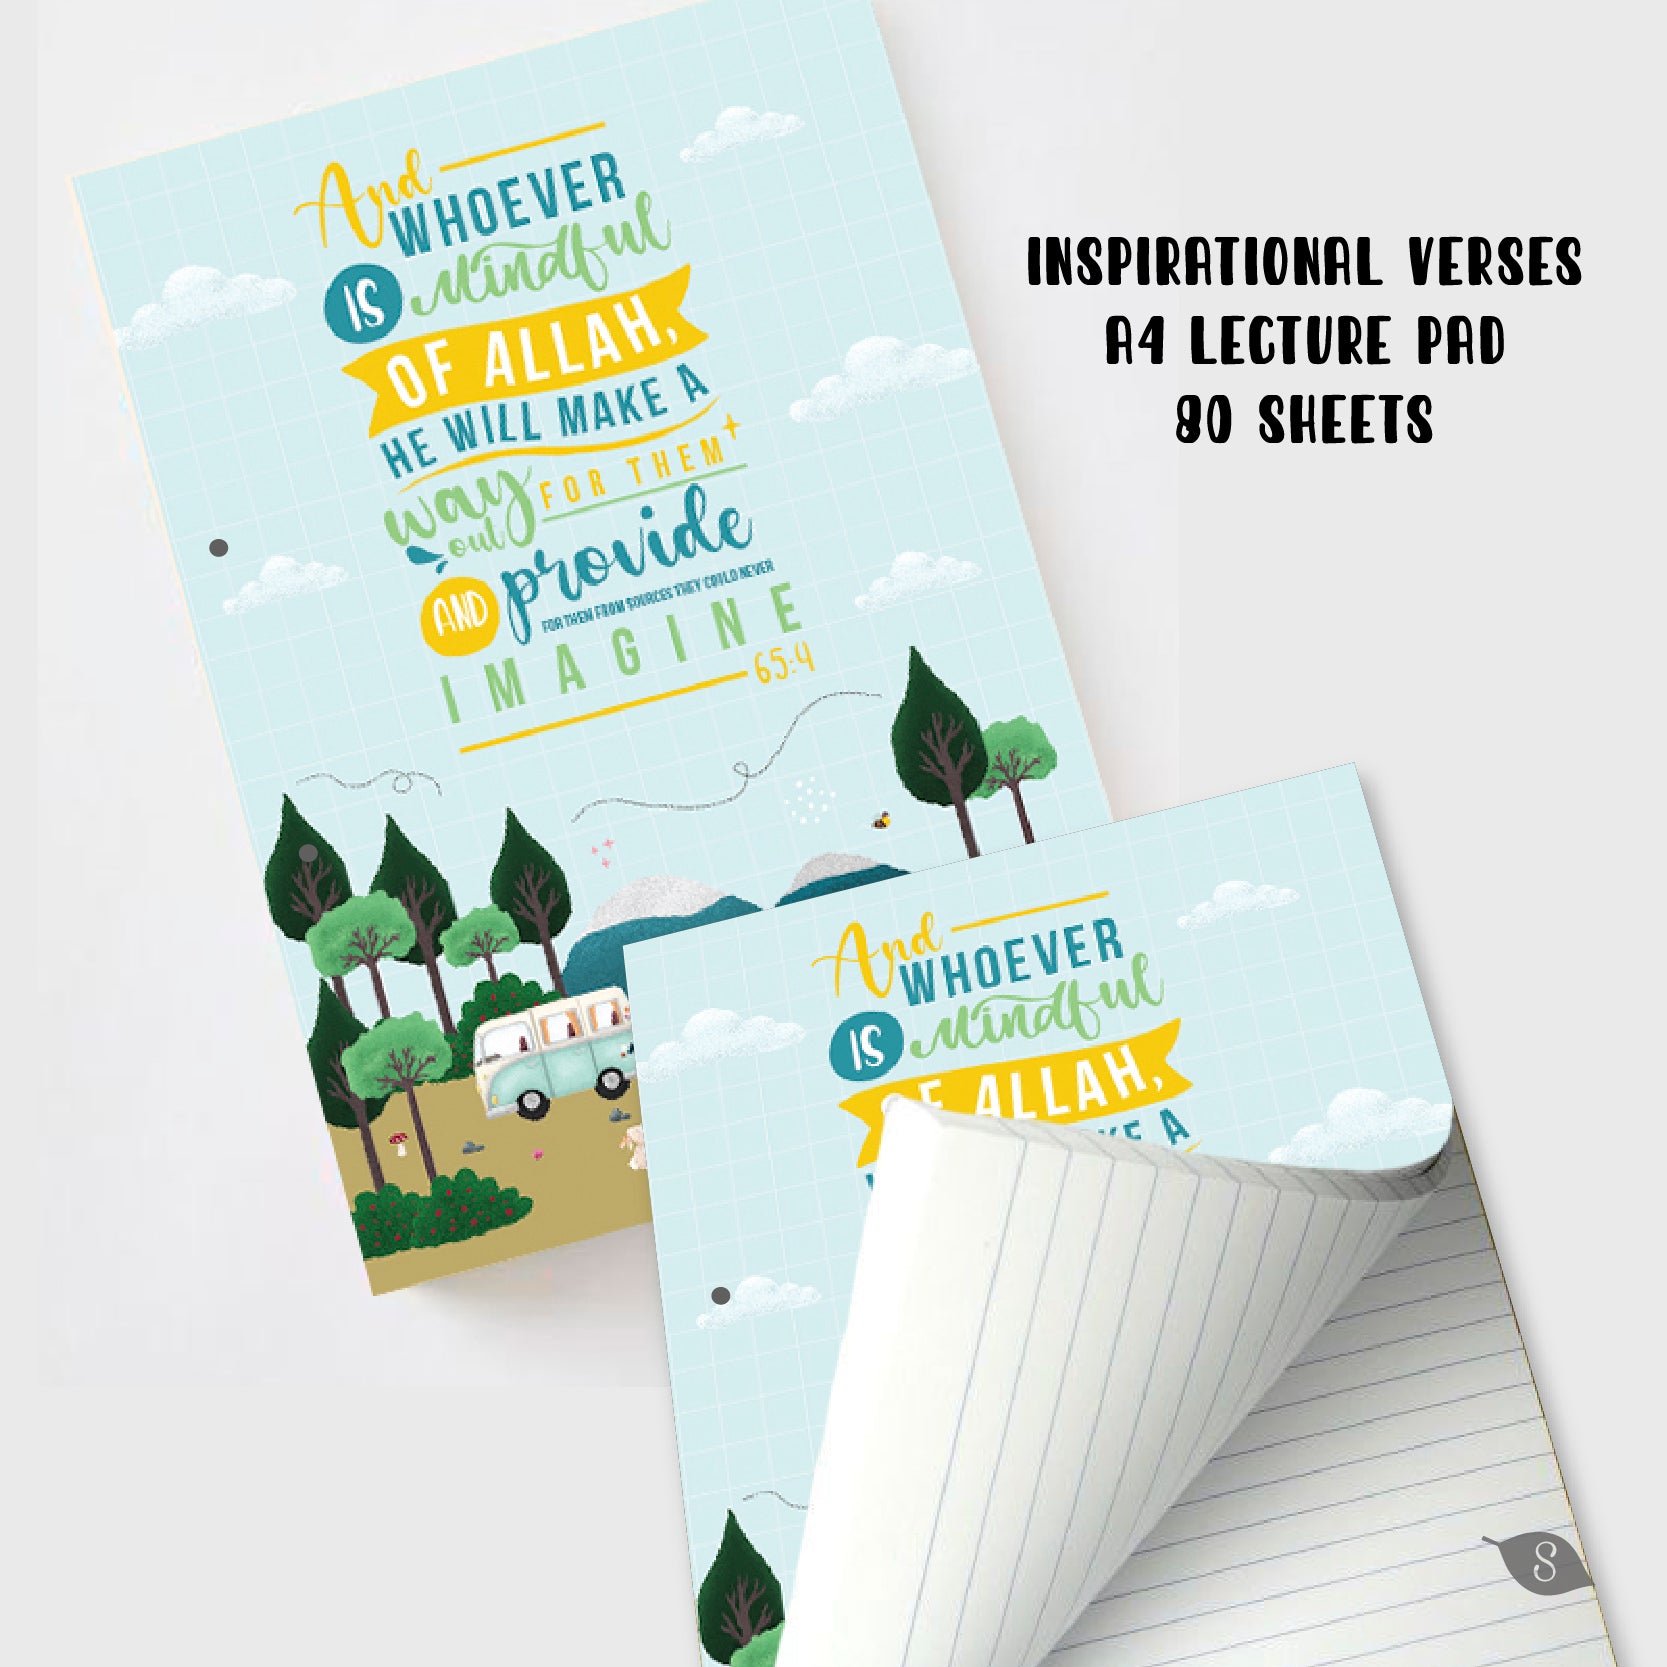 Faith Inspired Lecture Pad (5 Designs)